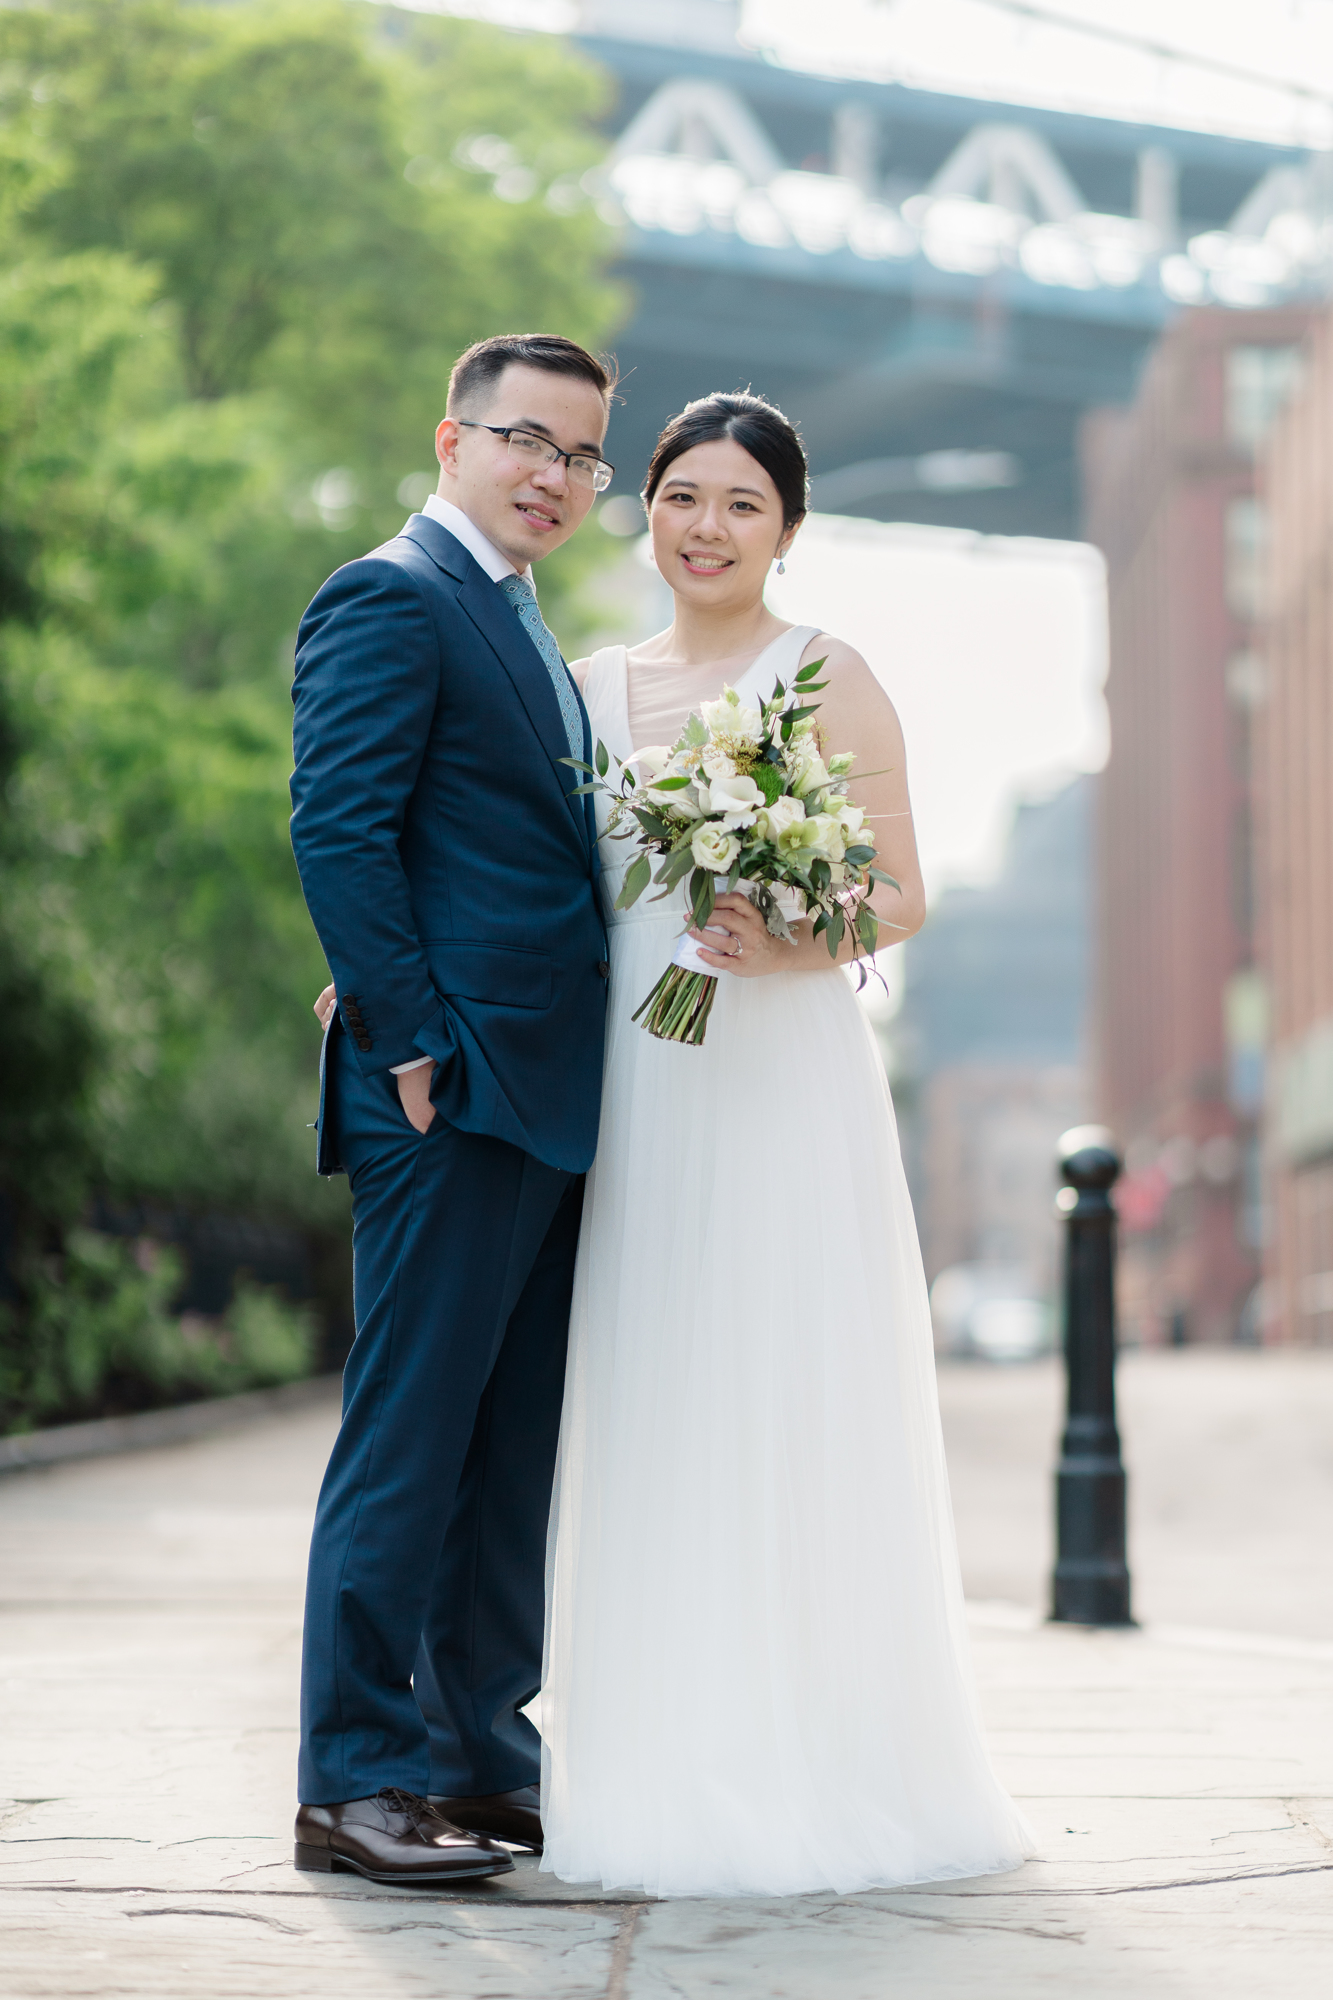 Candid Elopement Photography in New York\'s DUMBO and Central Park